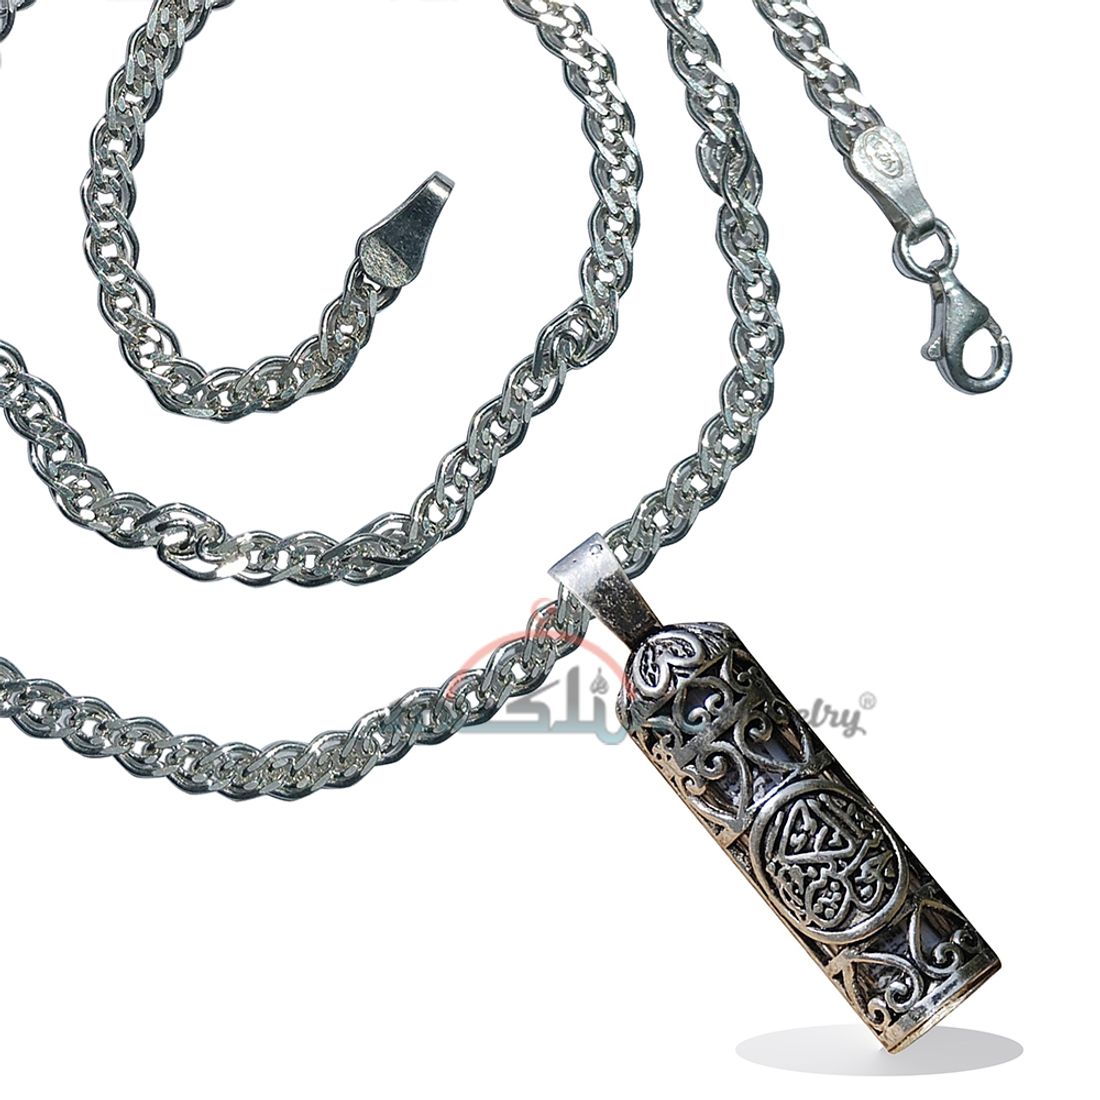 25″ Figaro Chain with Jawshan Kabir Cevsen Vial Enclosed in sterling Silver Talisman Pendant Tavis Necklace